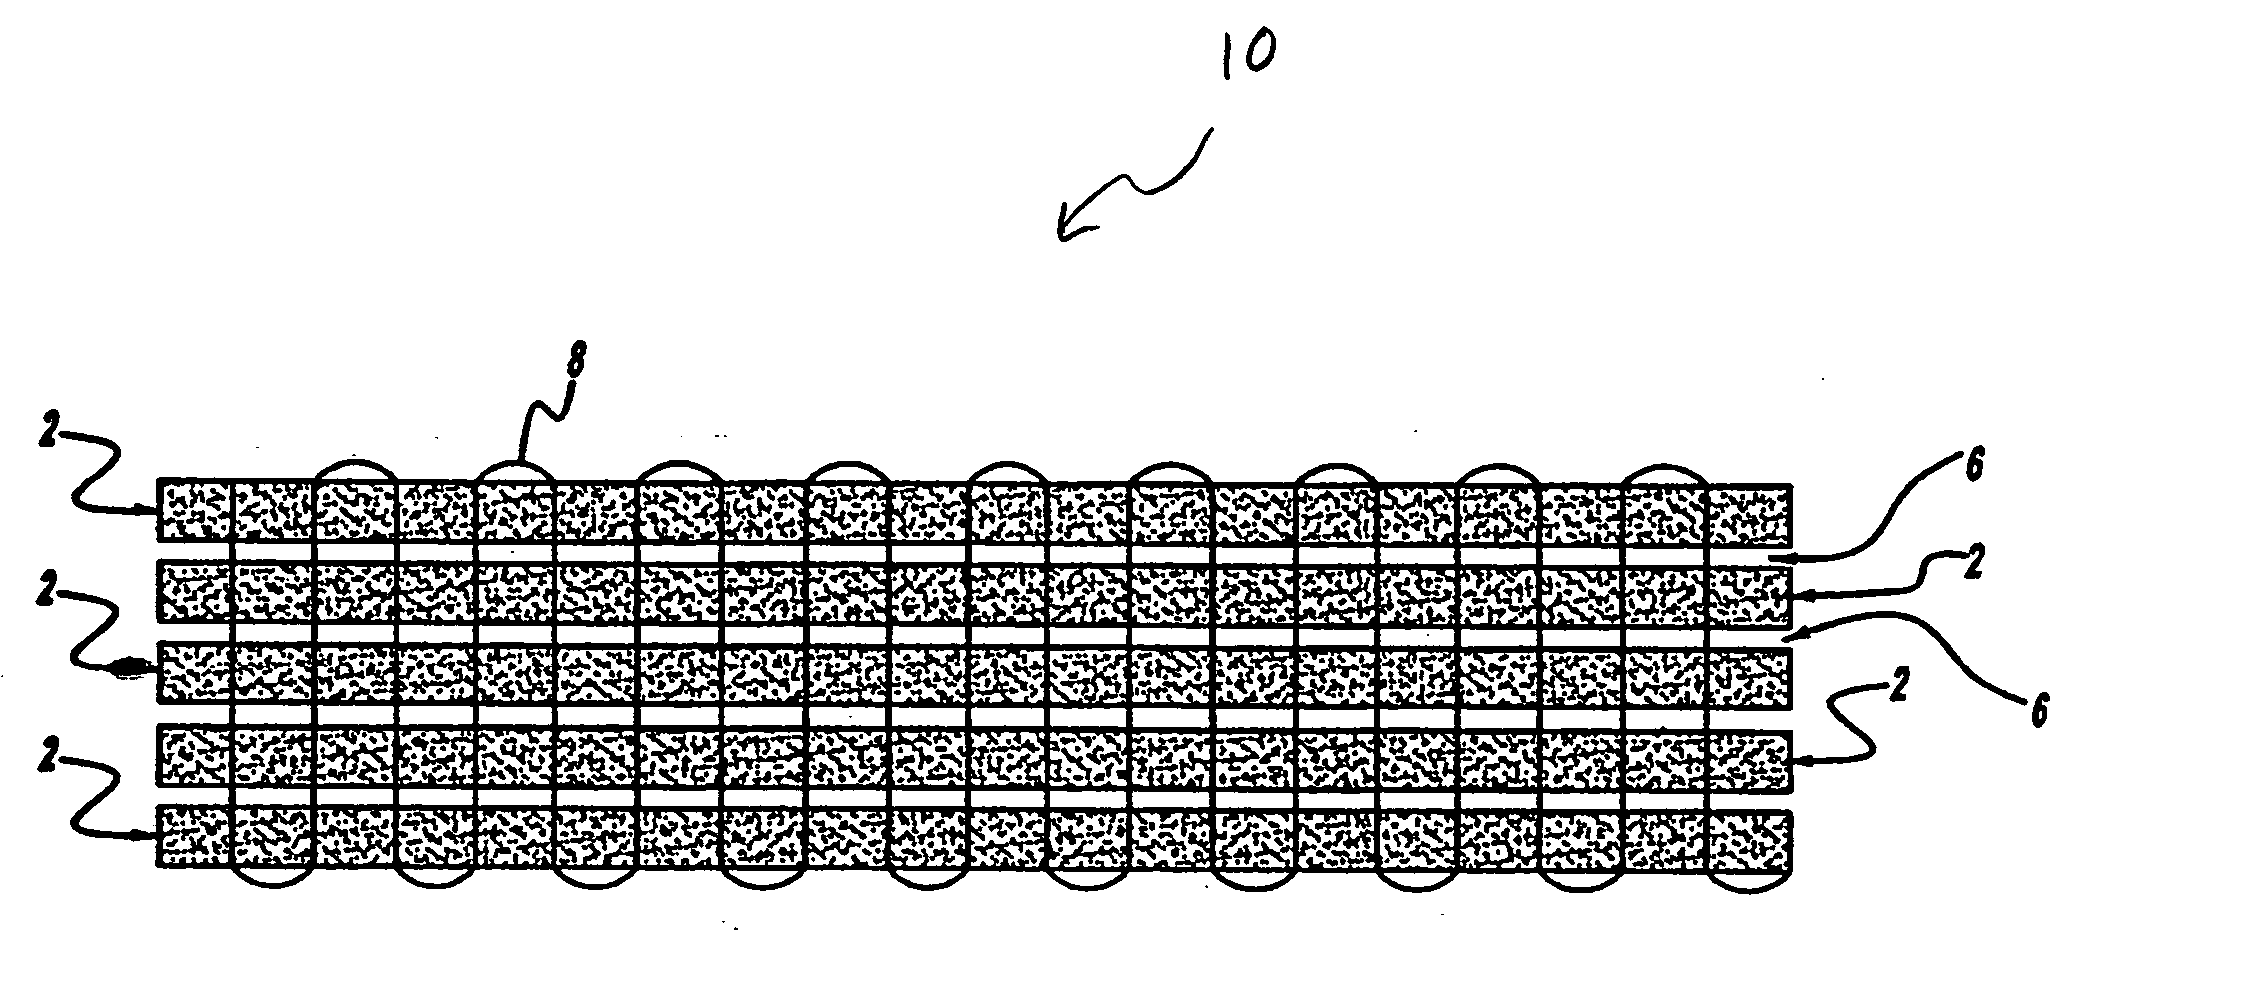 Methods and preforms for forming composite members with interlayers formed of nonwoven, continuous materials